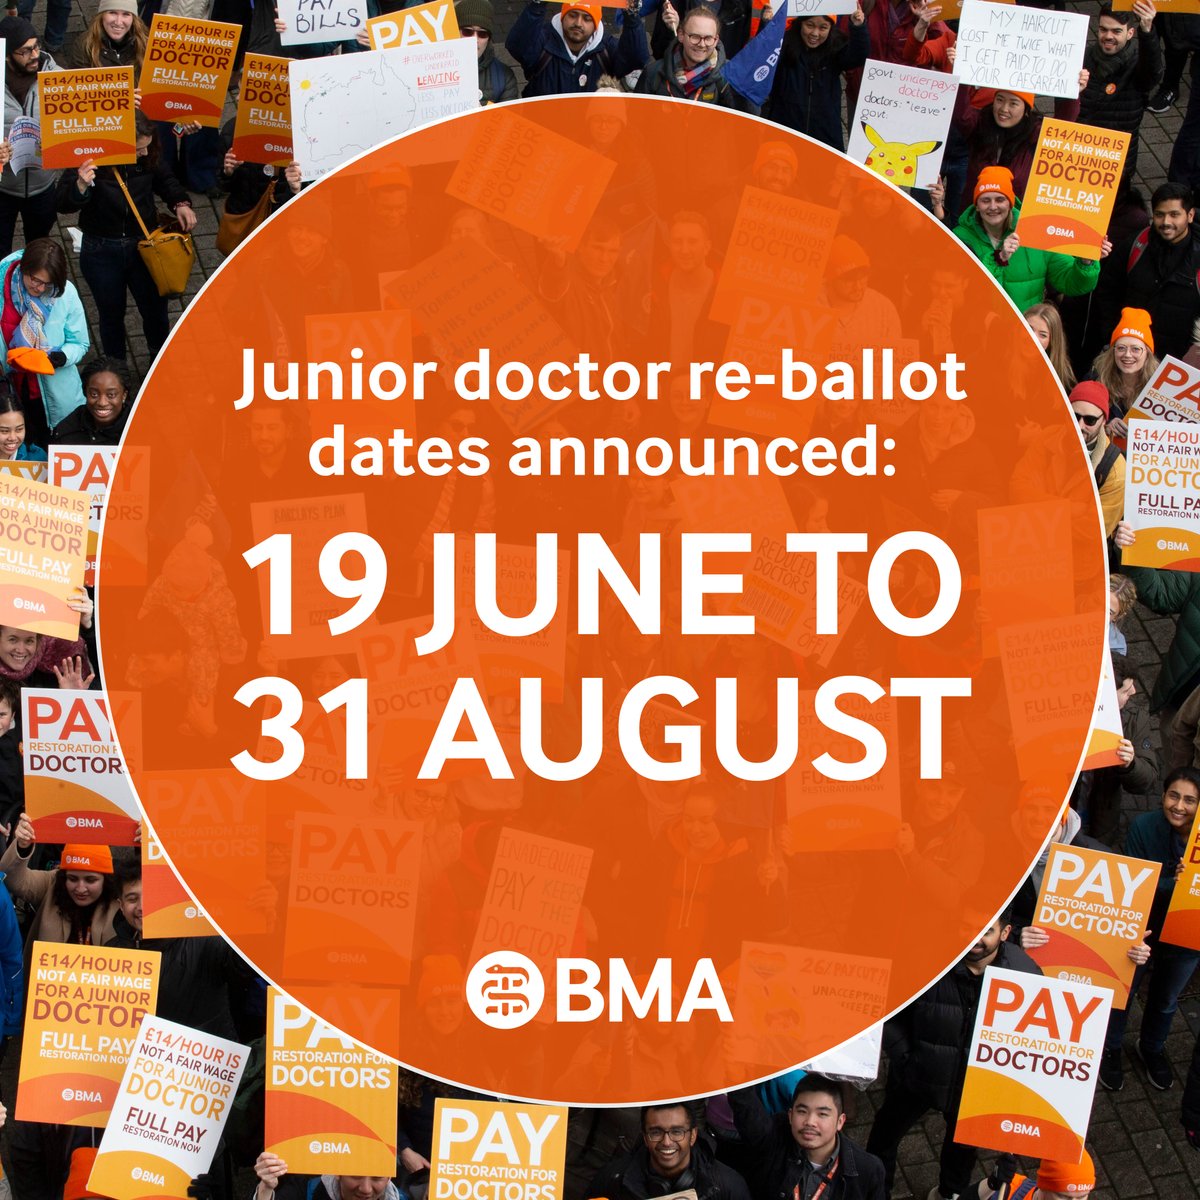 We are re-balloting junior doctors in England to extend our mandate to strike beyond August. Make sure your details are up to date and look out for your ballot from 19 June bma.org.uk/our-campaigns/…